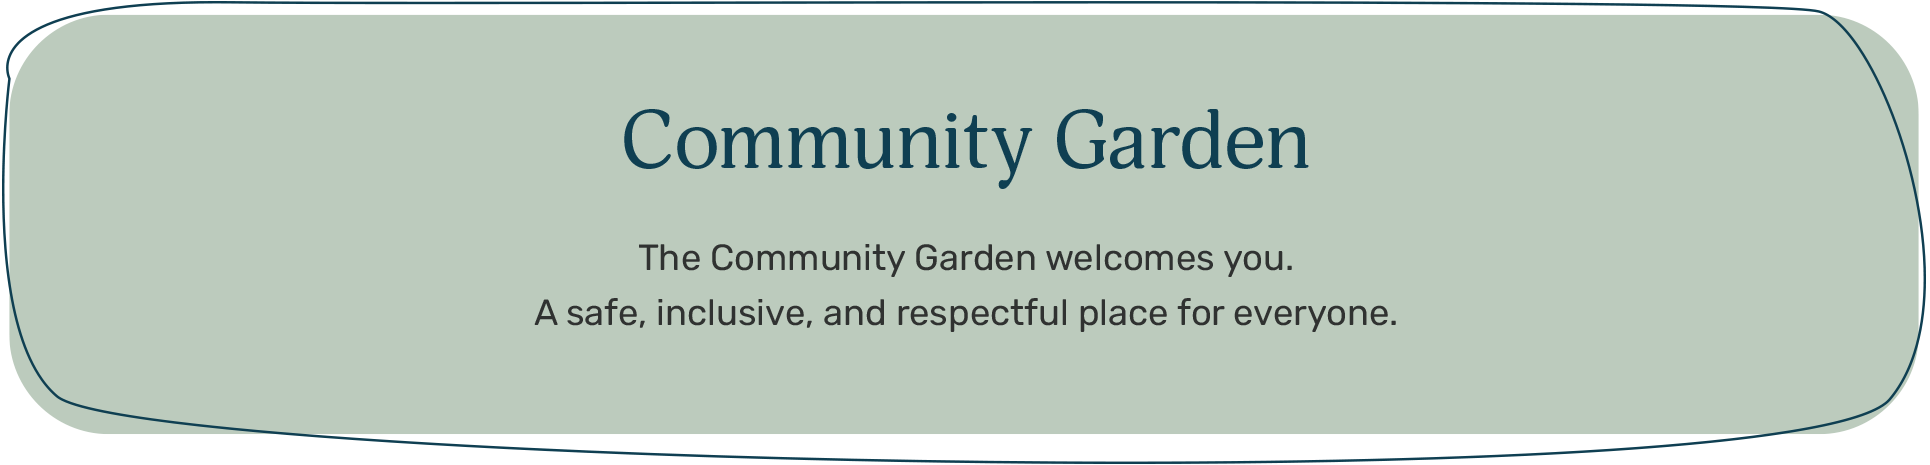 Kyogle Family Support Services - Community Garden